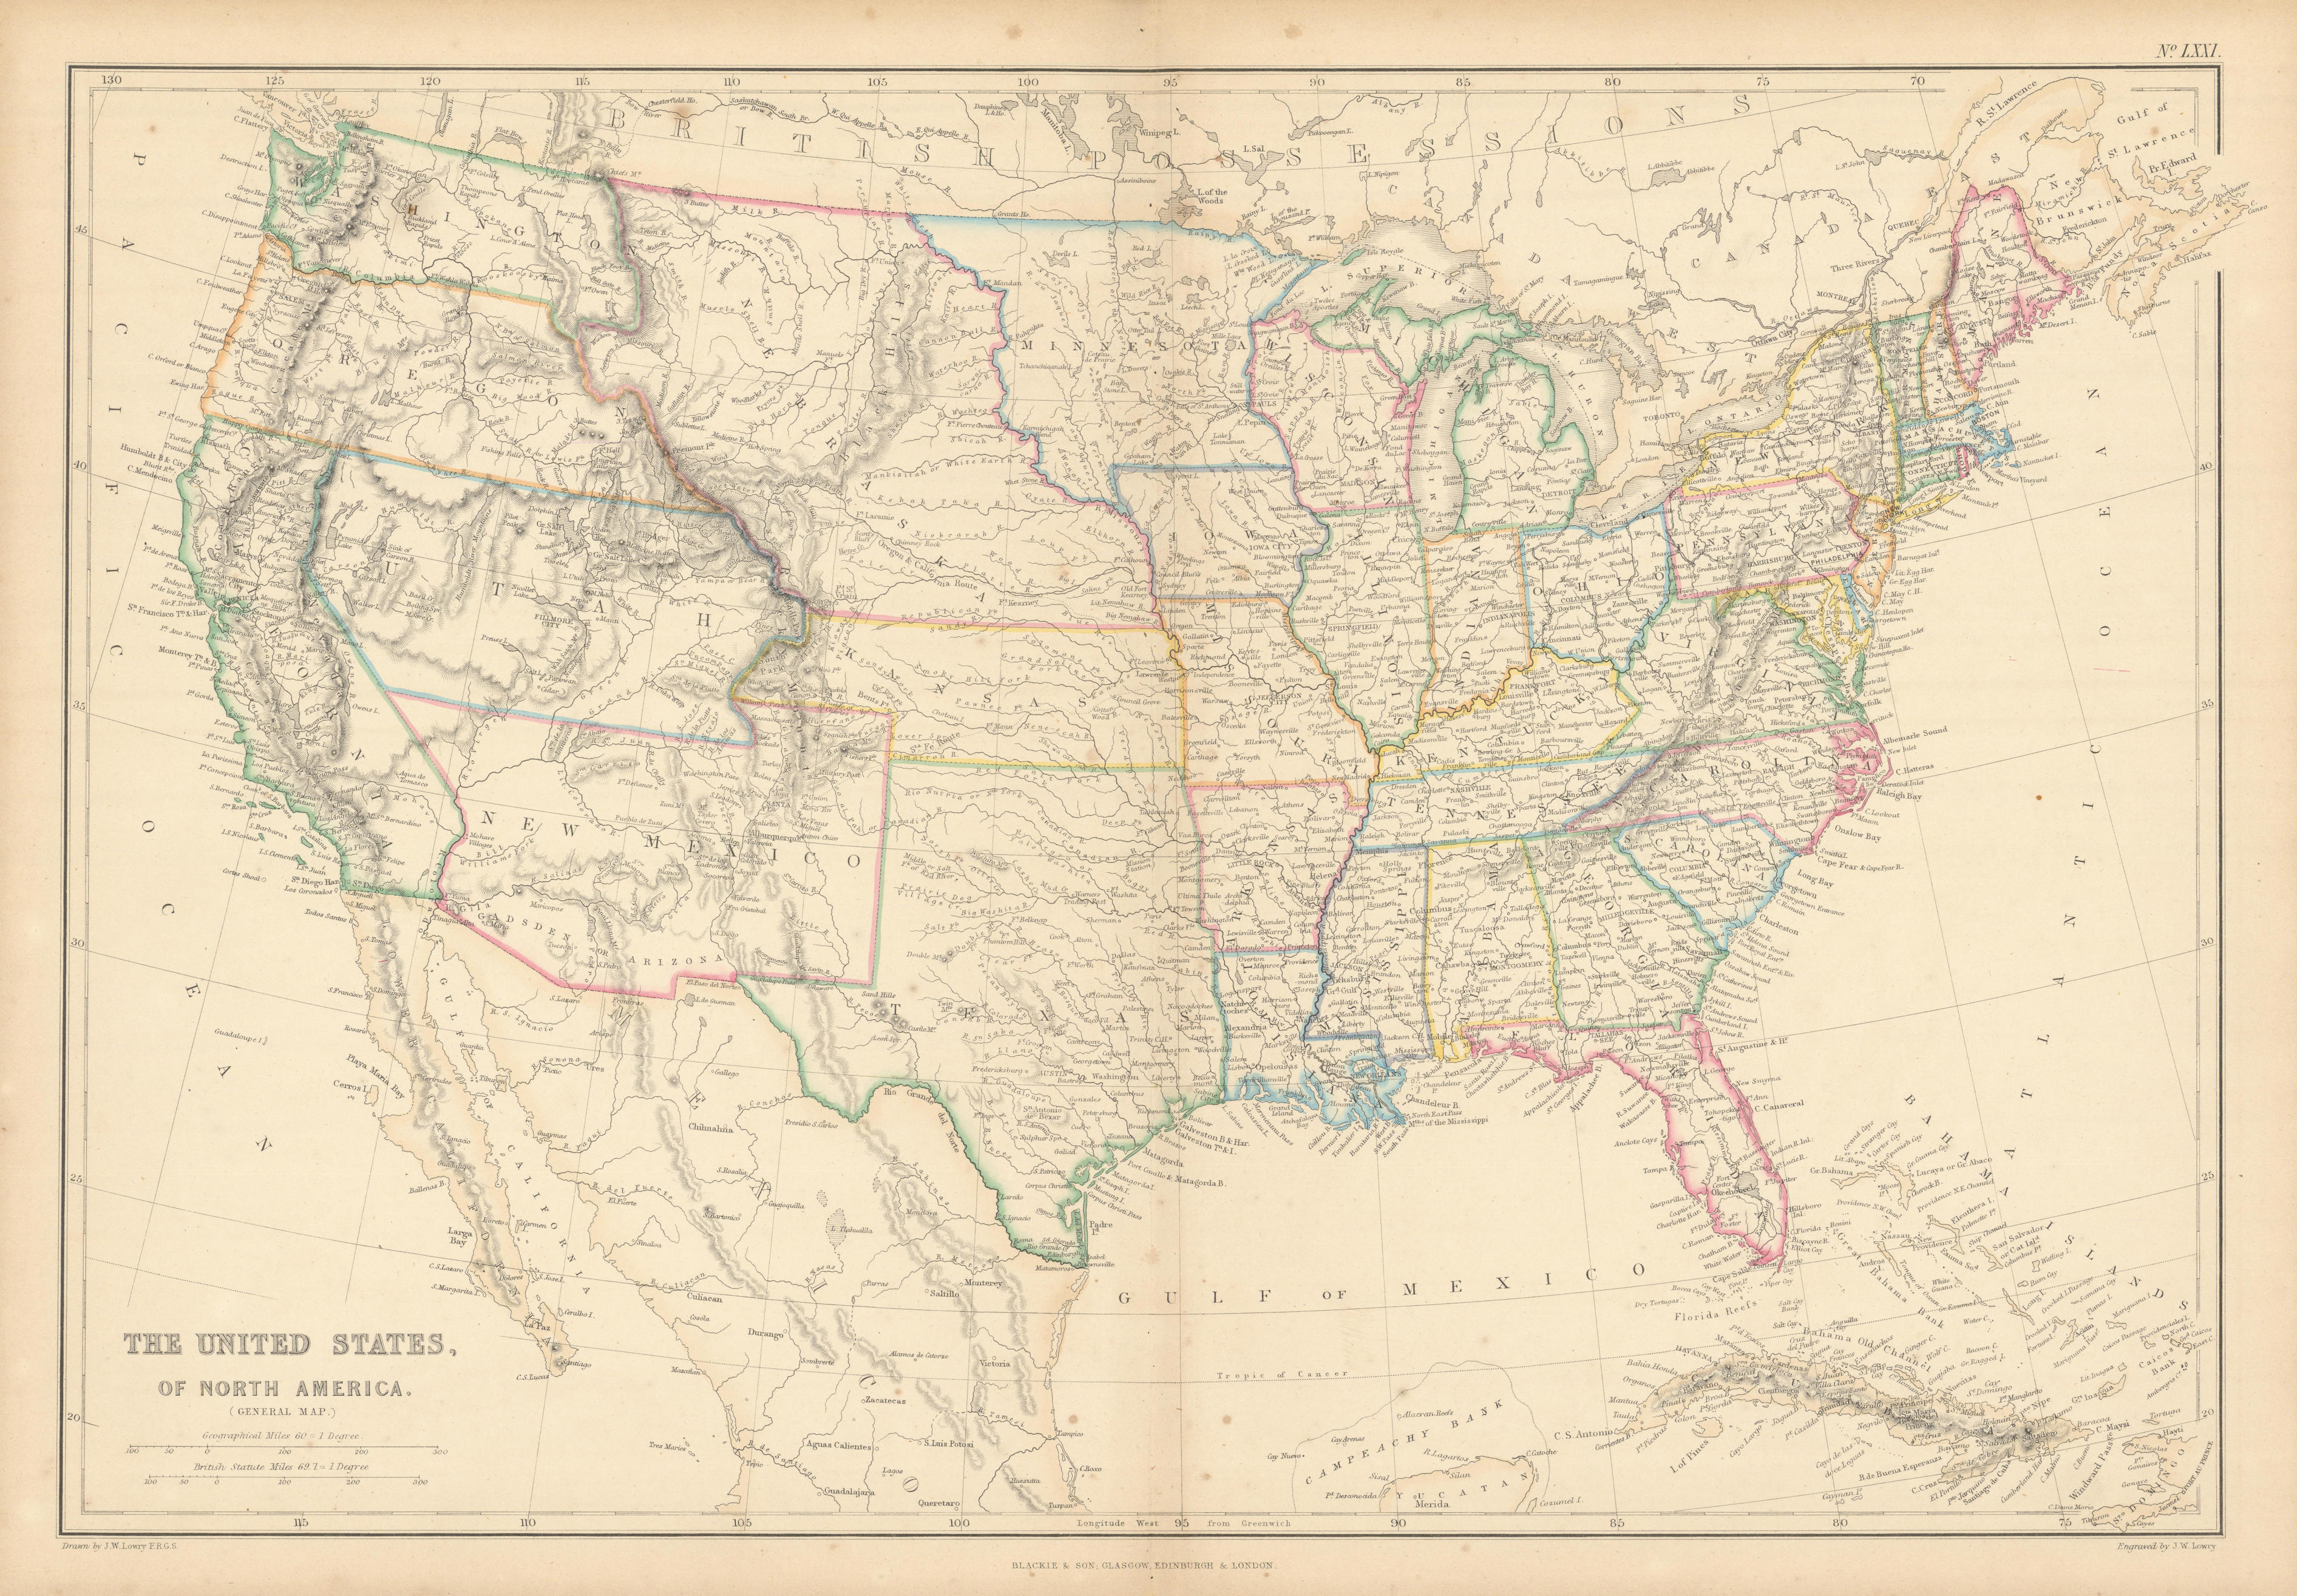 United States of North America. Early territorial boundaries. LOWRY 1859 map